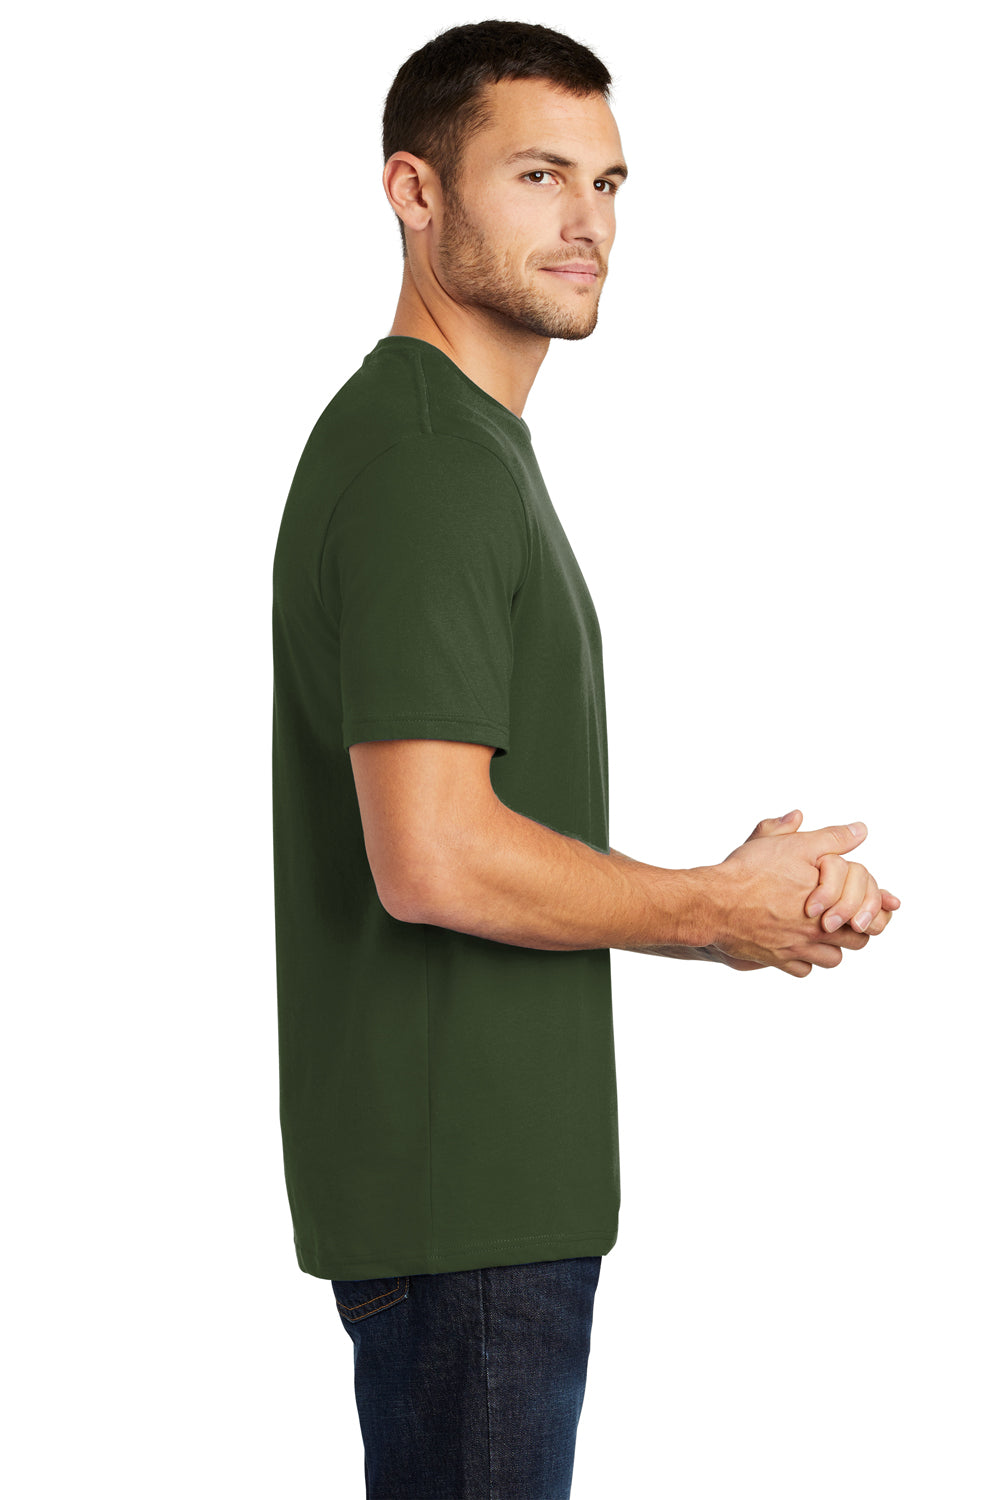 District DT104 Mens Perfect Weight Short Sleeve Crewneck T-Shirt Thyme Green Side